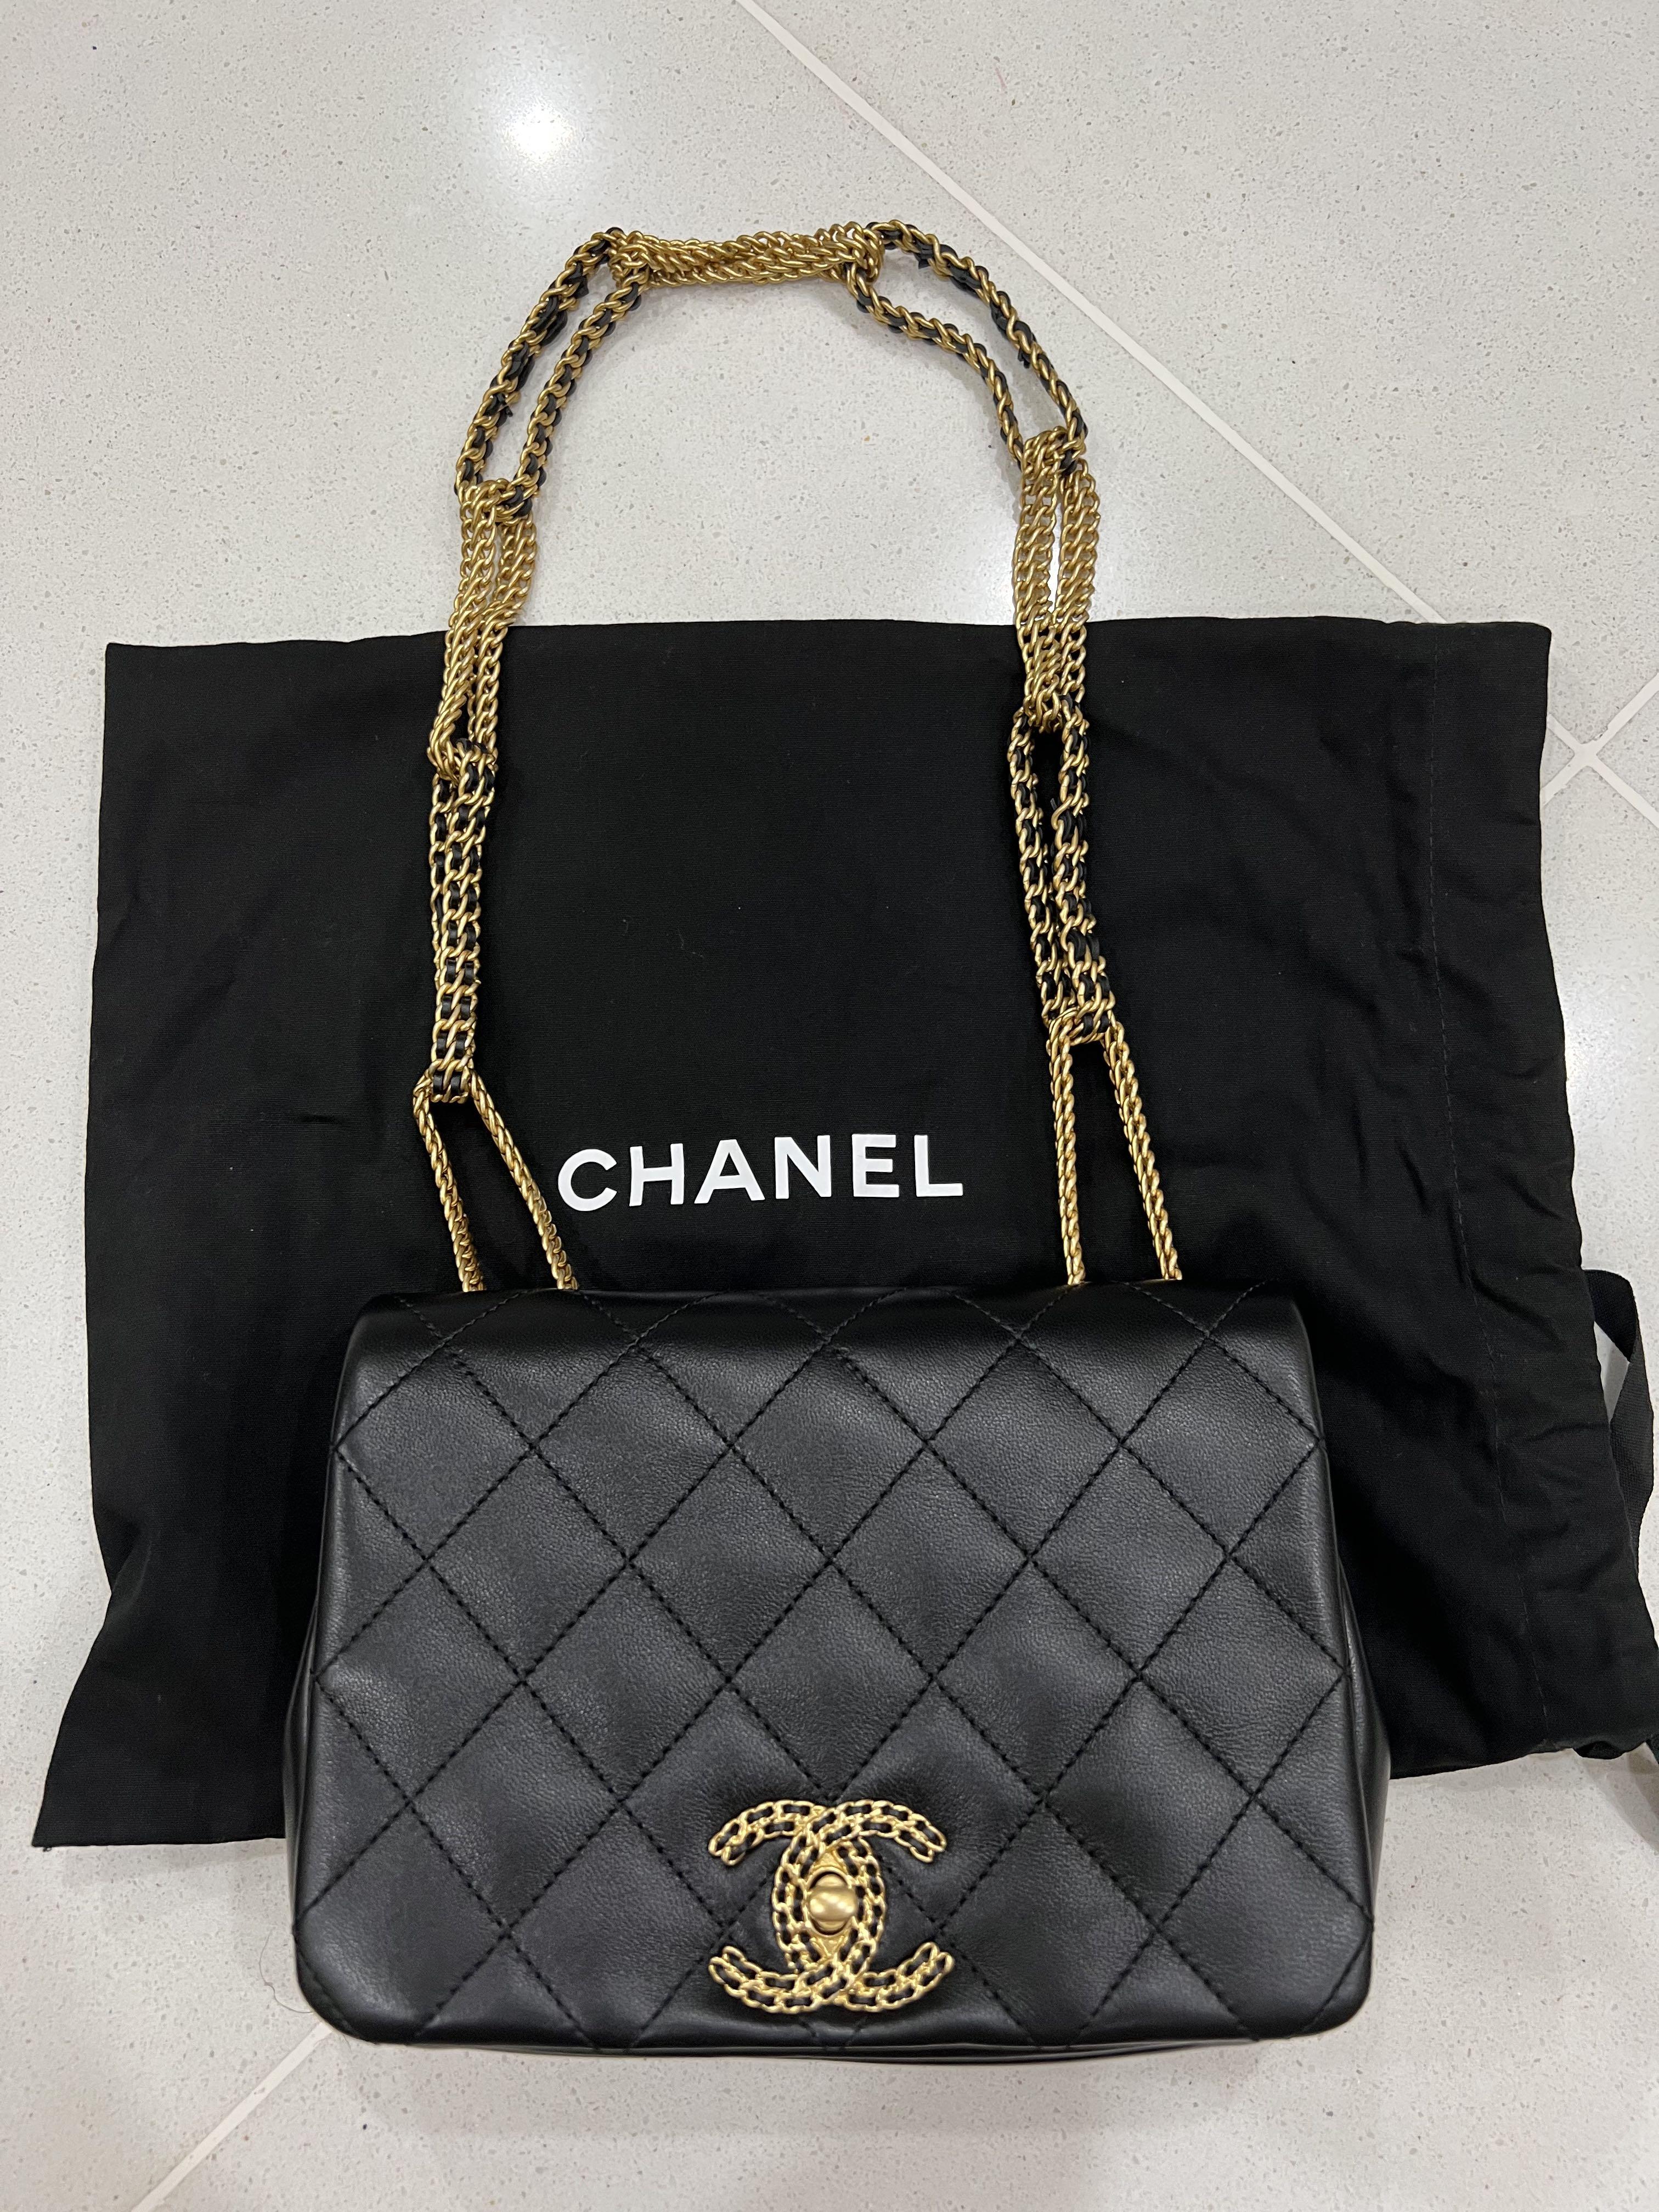 BNIB Limited Edition Chanel large flap bag - Lamb Skin and Gold